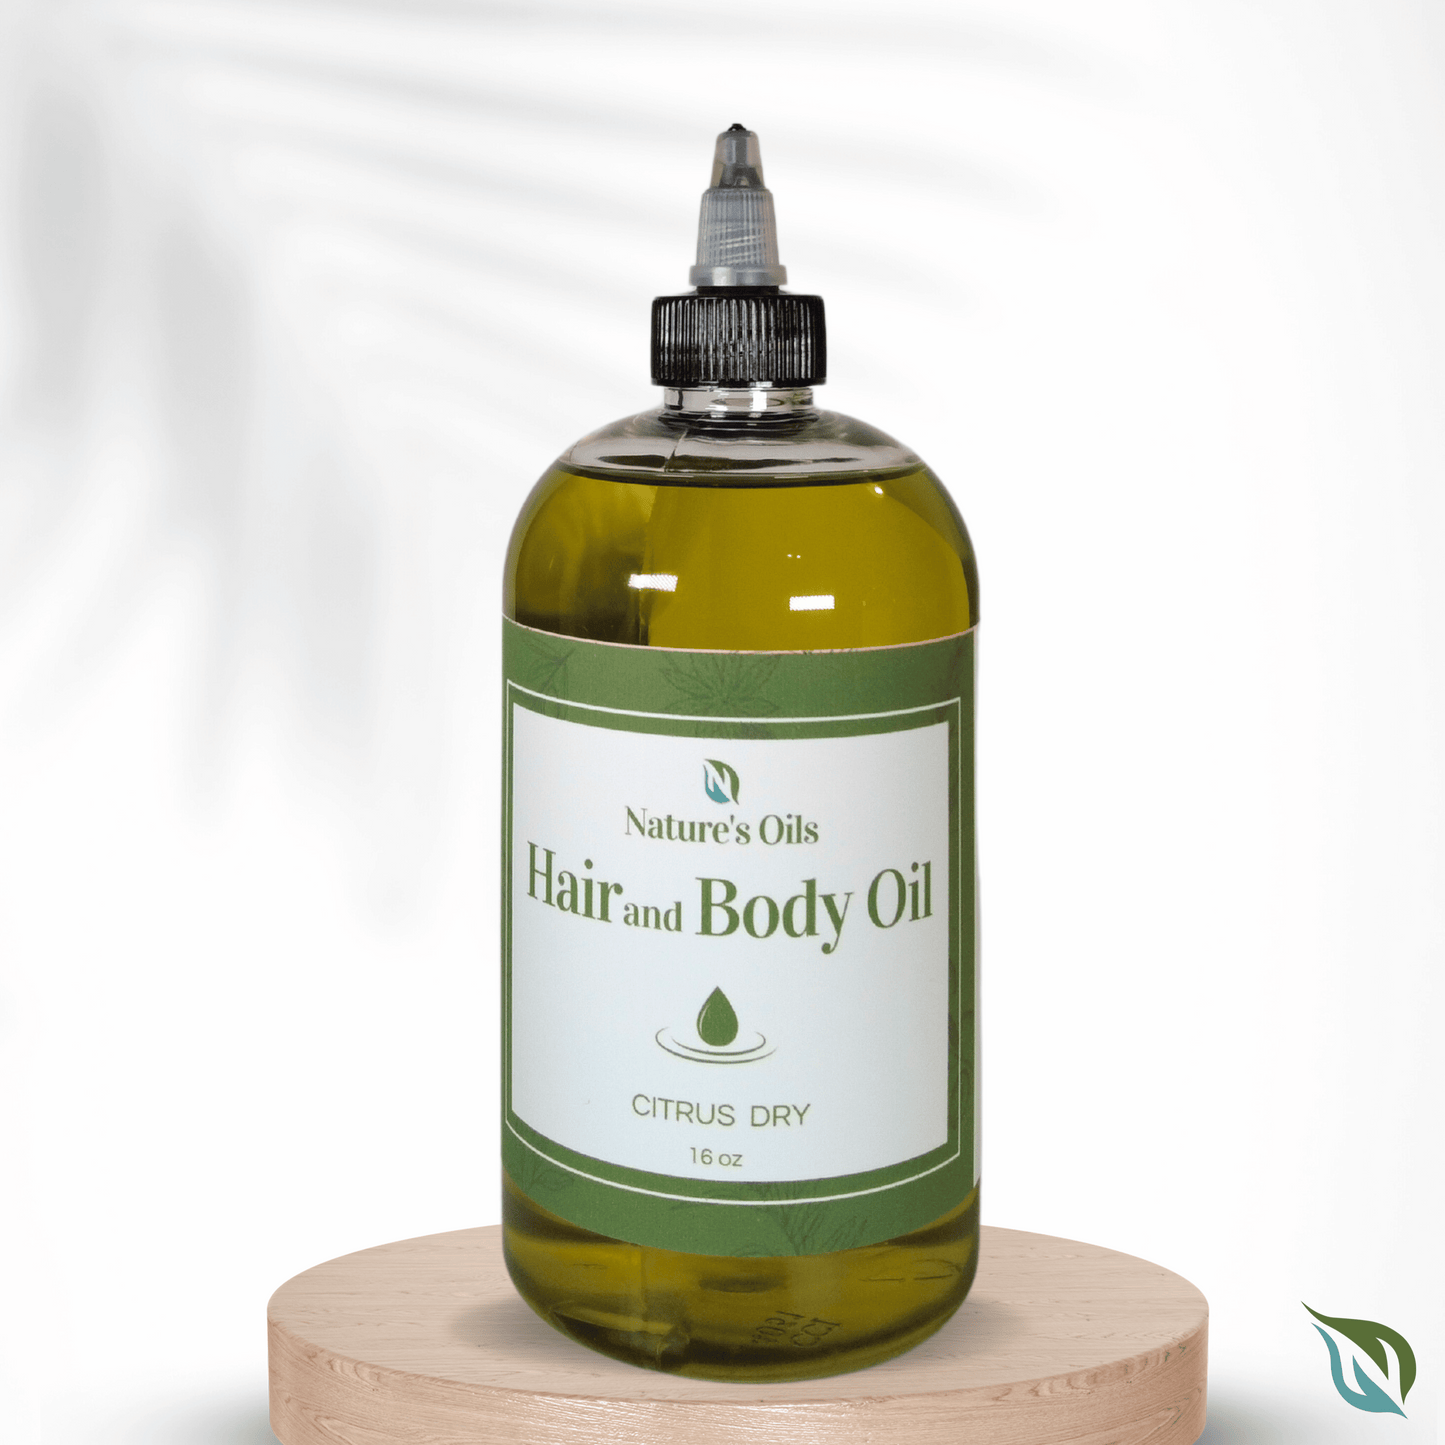 Nature's Oils Hair and Body Oil Citrus Dry 16 oz